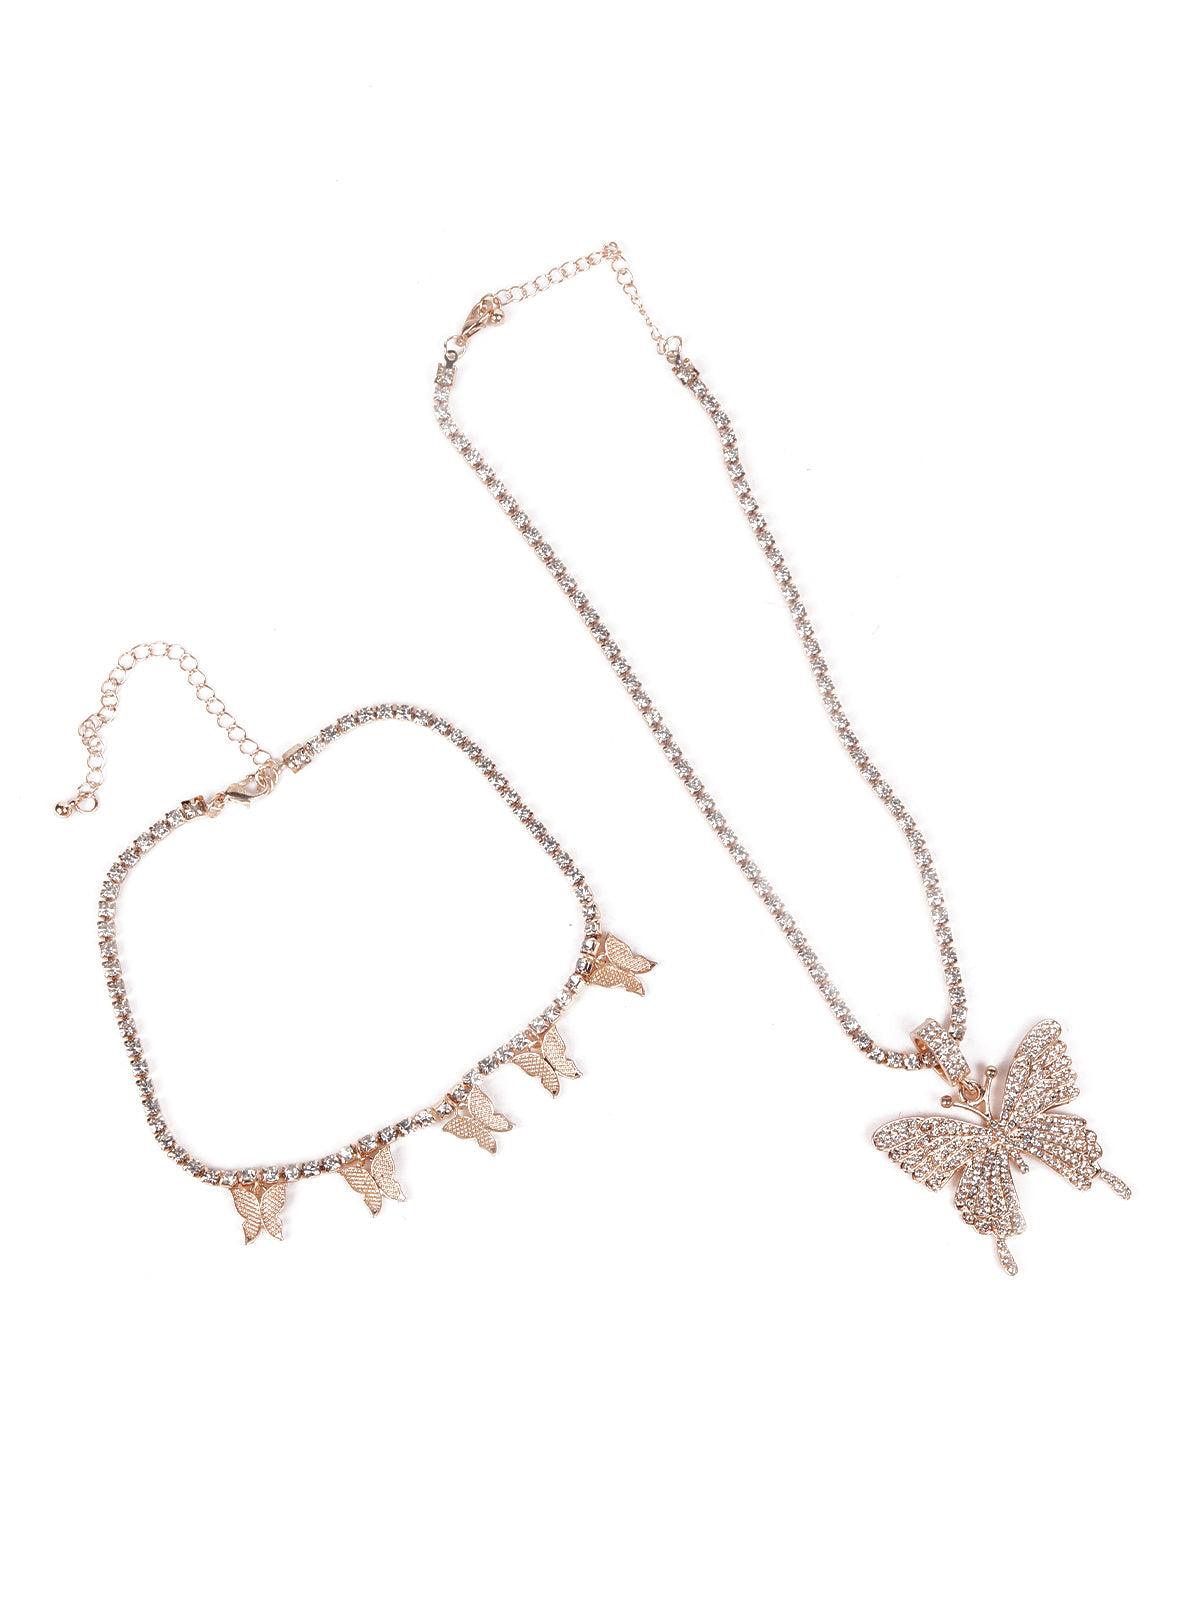 Two pieces designer butterfly necklace - Odette